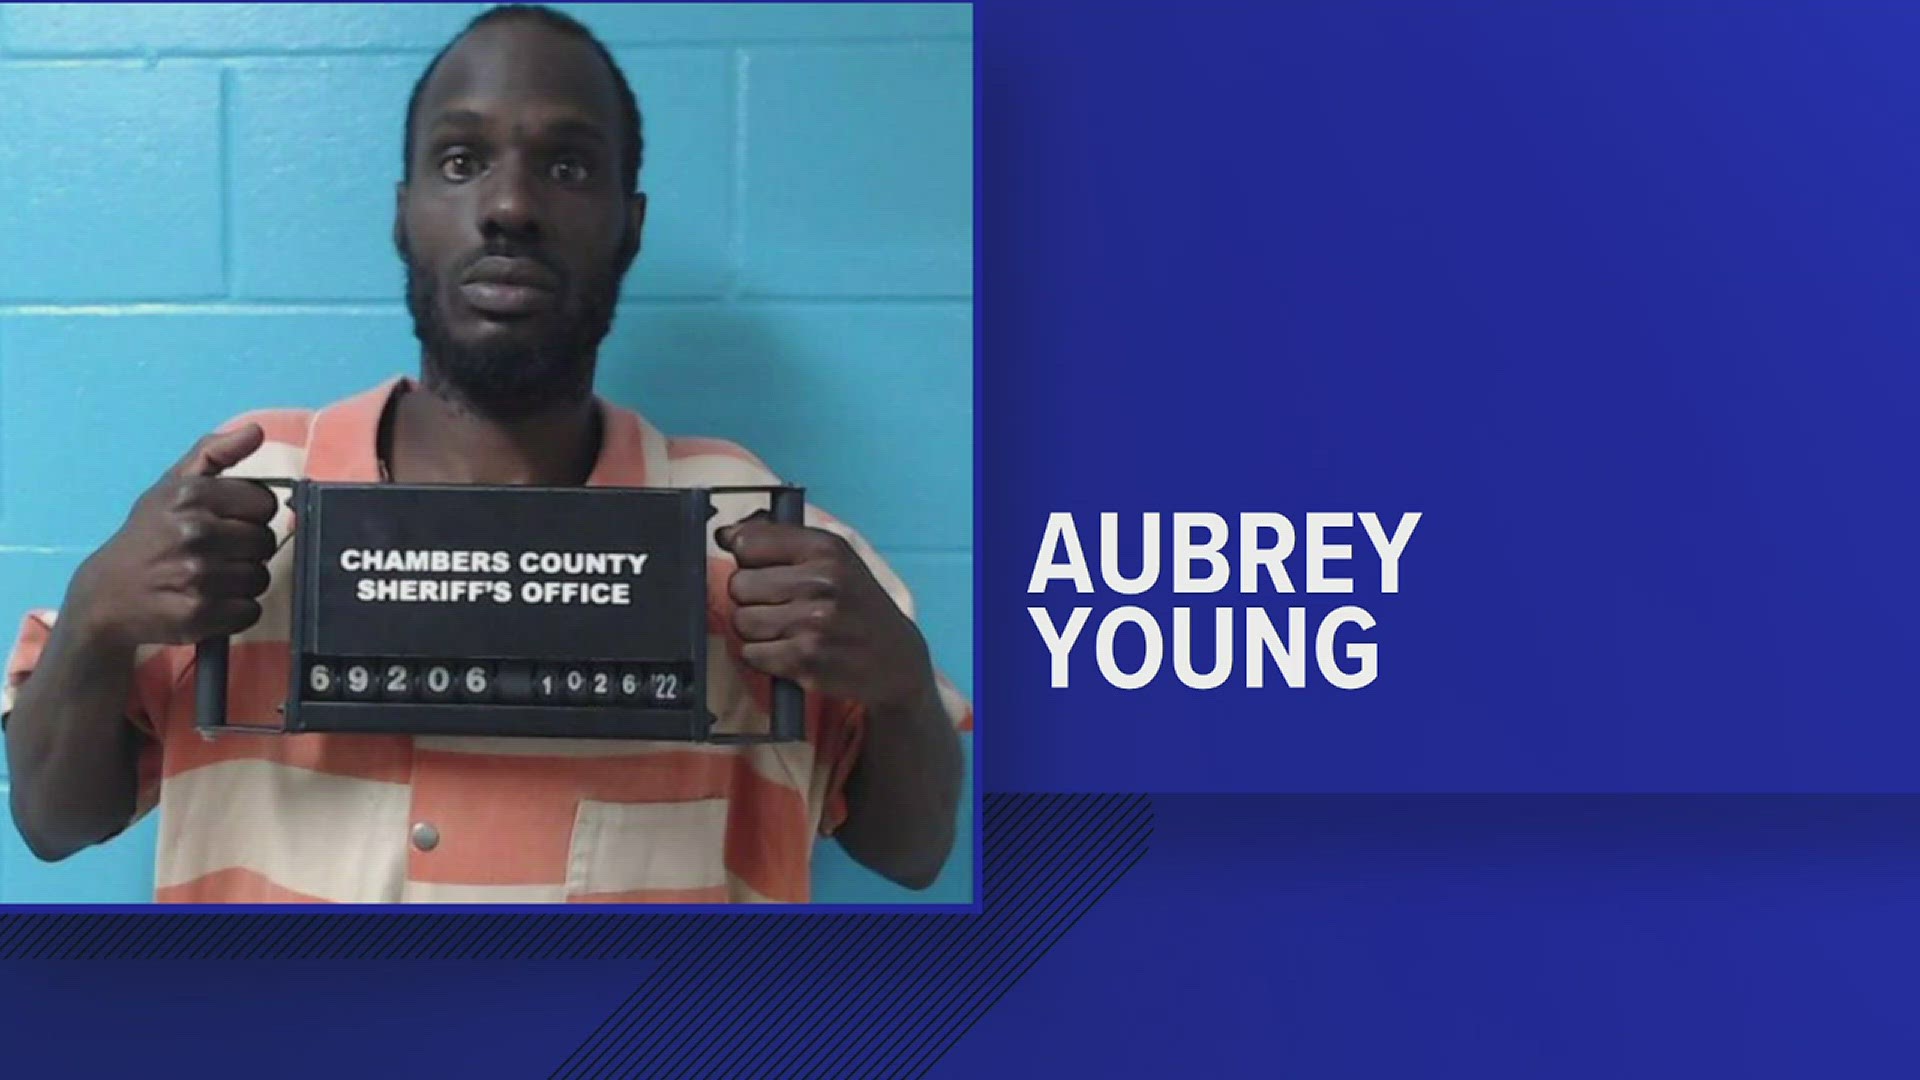 If convicted, 36-year-old Aubrey Young of New Orleans, Louisiana faces up to 22 years in federal prison.